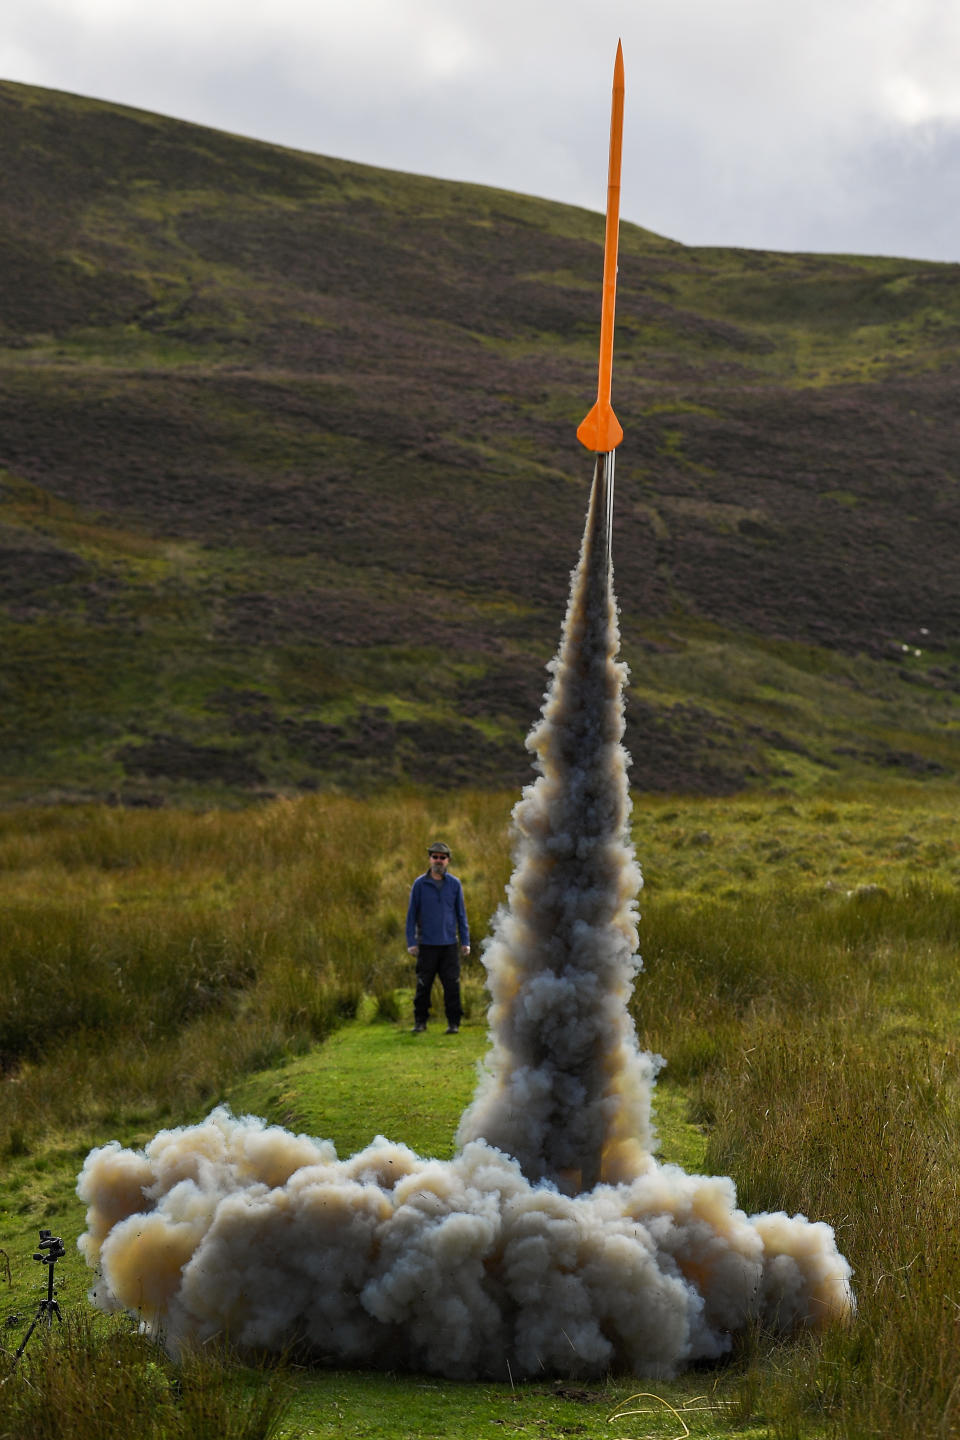 <p>A man watches a rocket launch while gathering for International Rocket Week on August 22, 2018 in Fairlie, Scotland. The IRW 2018 is the 33rd annual rocket flying event in Scotland for model and amateur rocketeers with rocketry followers of all ages that runs for eight days and encompasses research, competition rocket building and flying. (Photo by Jeff J Mitchell/Getty Images) </p>